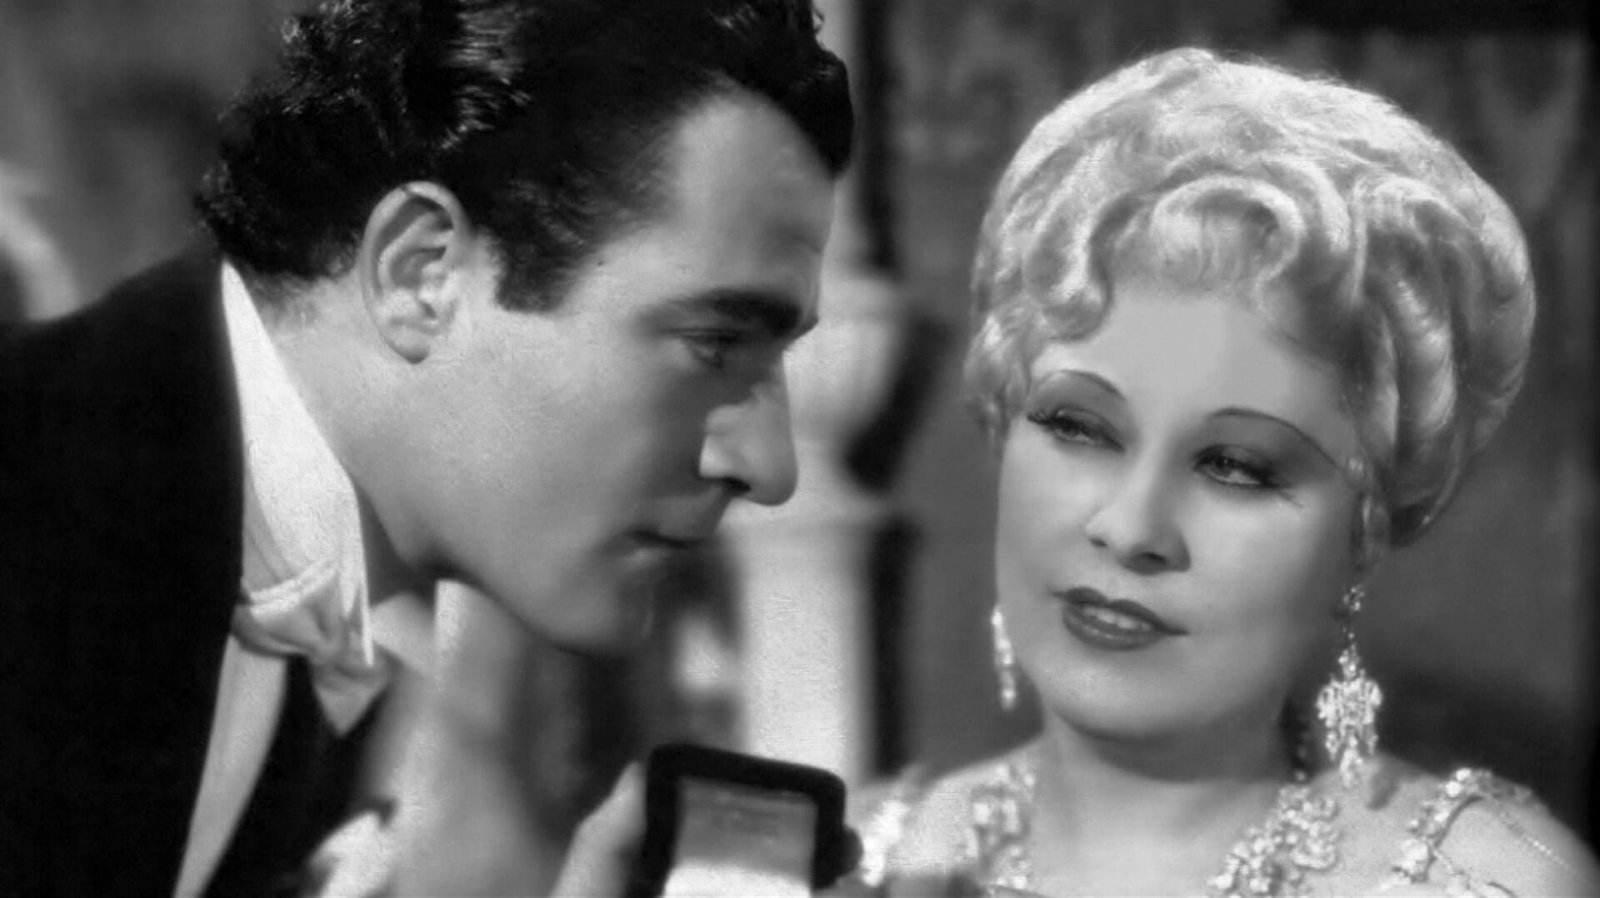 "Why don't you come up sometime and see me?" - She Done Him Wrong (1933)